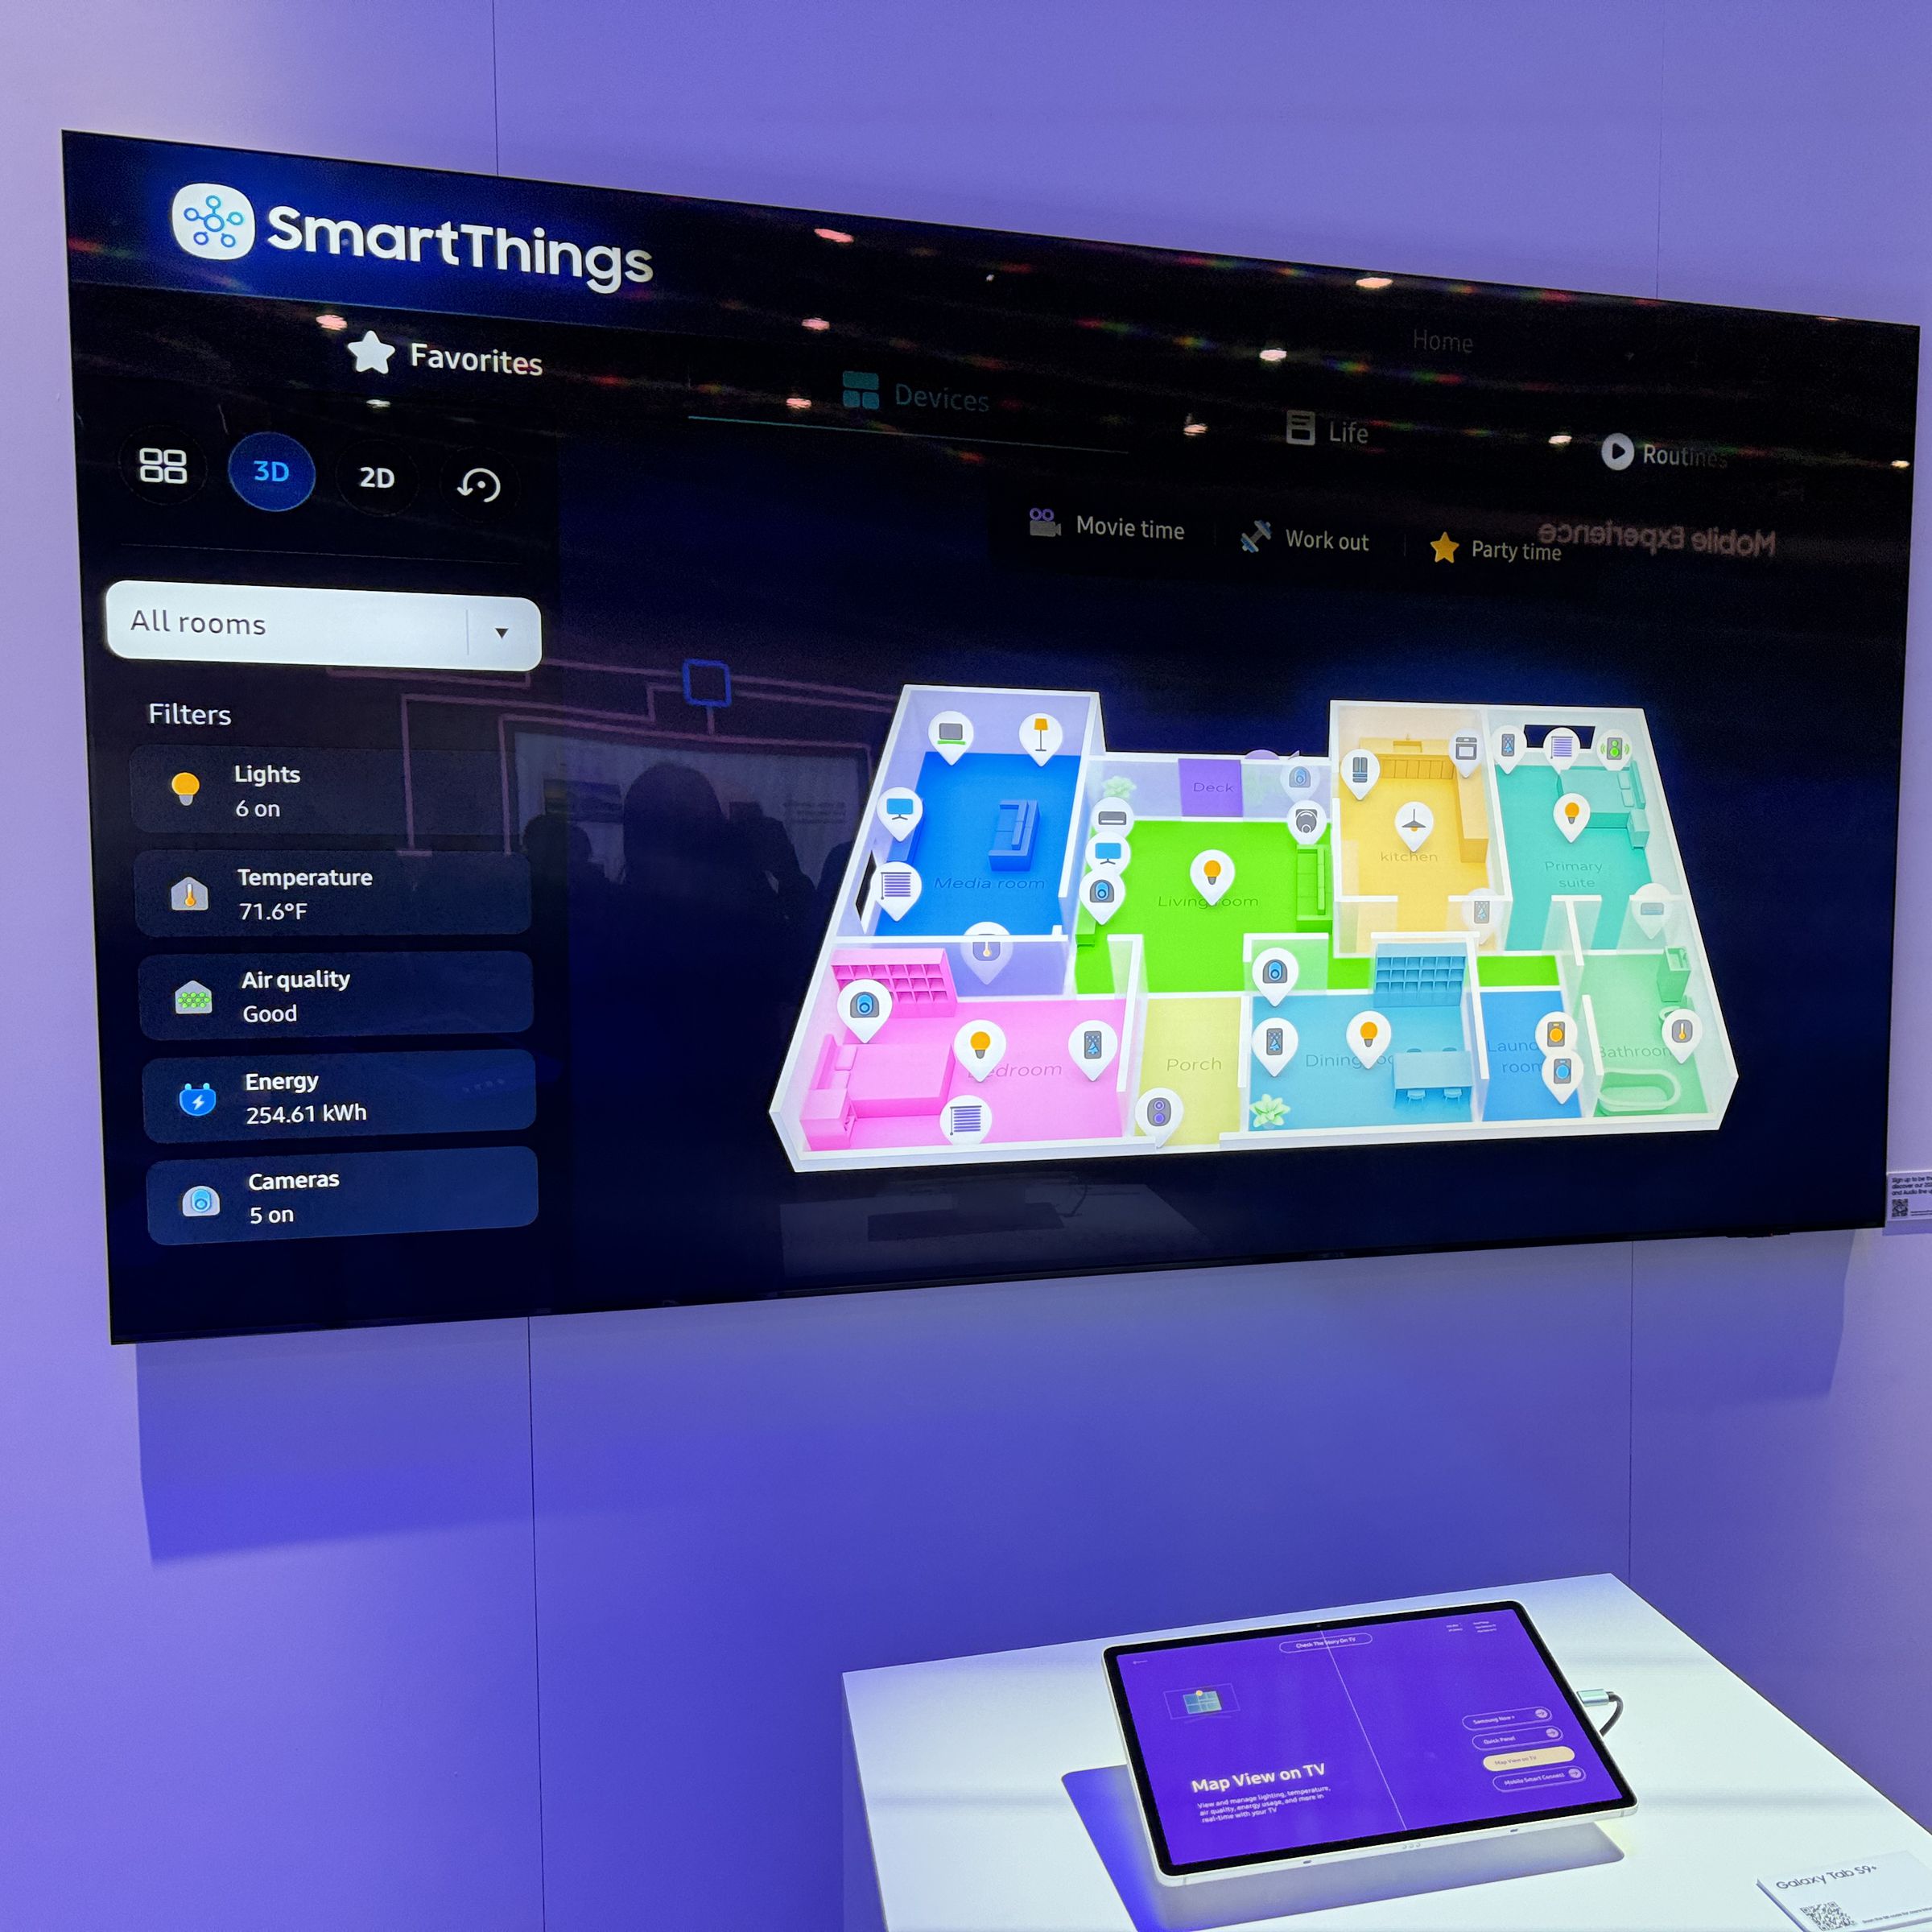 Controlling your smart home on your TV — something Samsung’s new SmartThing’s Map View lets you do more intuitively — could make it simpler for everyone in the home to use smart devices.